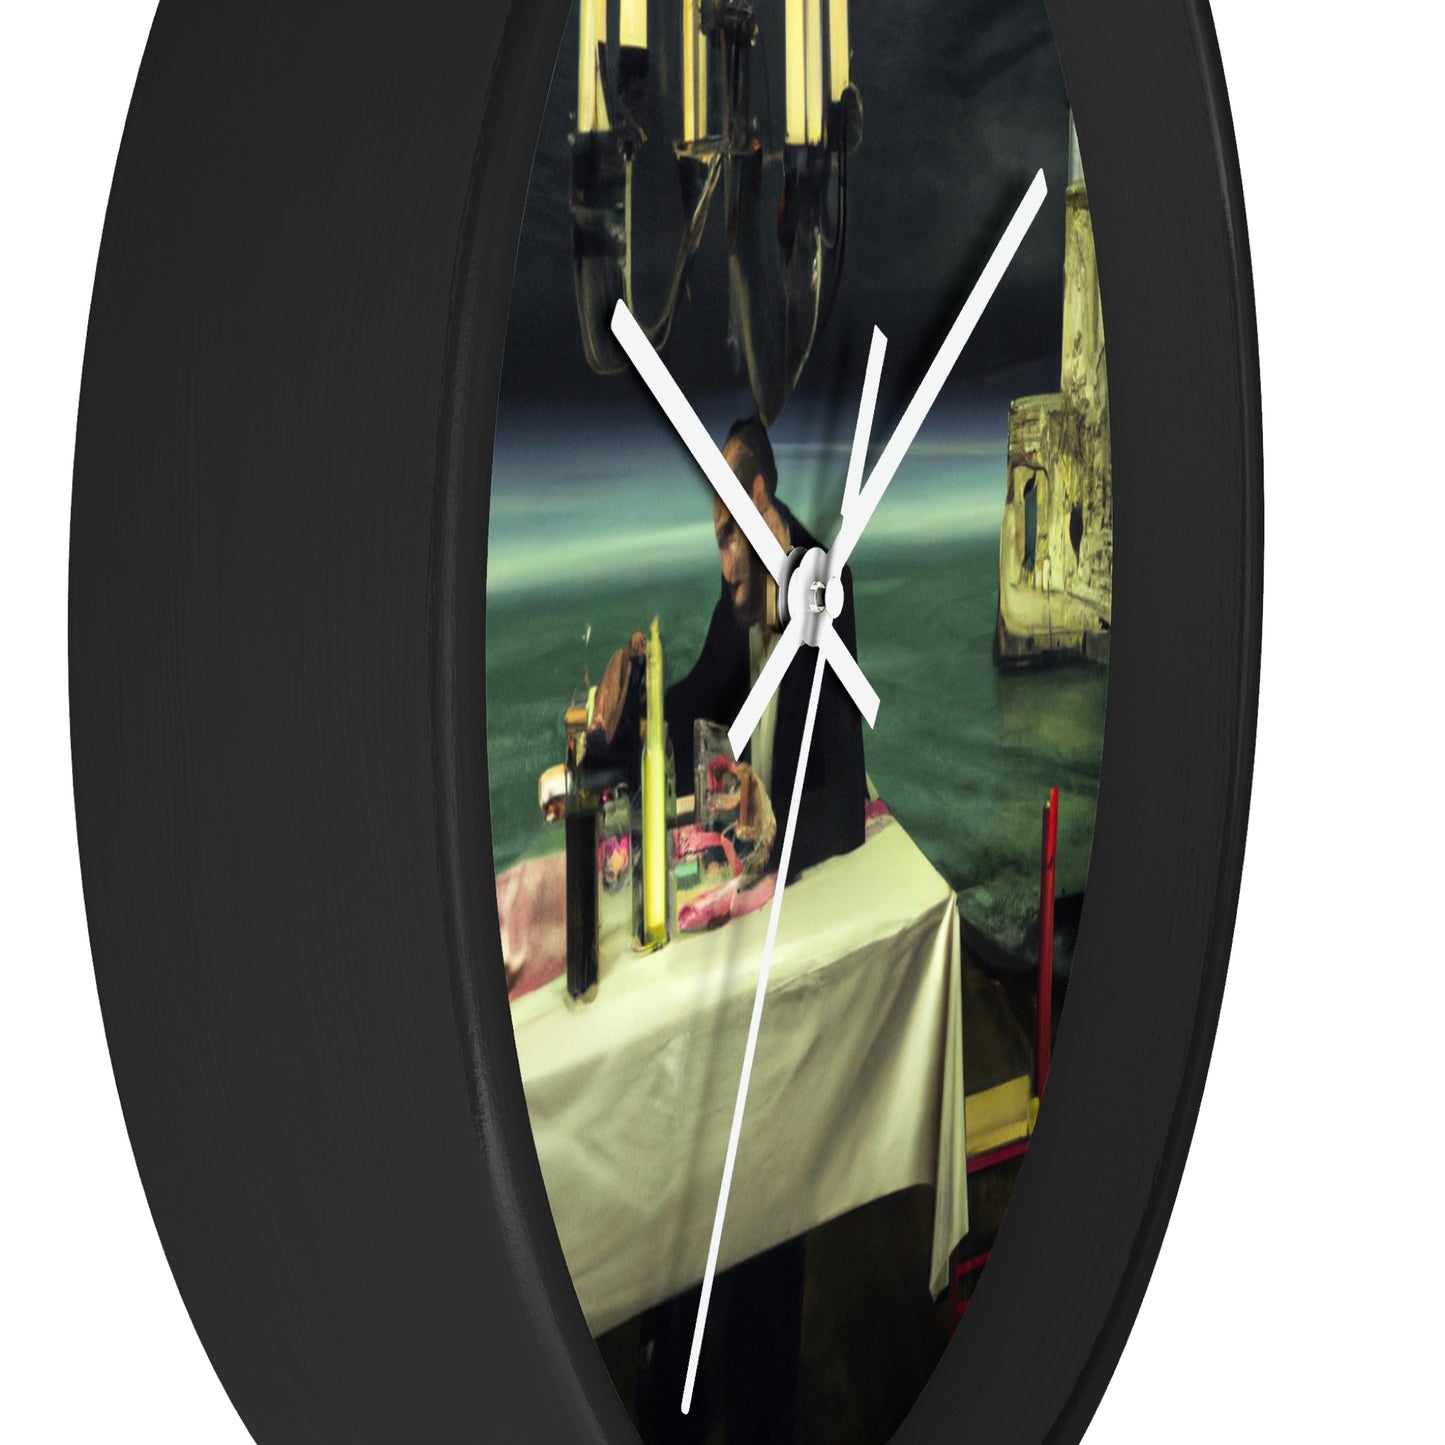 "A Beacon of Romance: An Intimate Candlelit Dinner in a Forgotten Lighthouse" - The Alien Wall Clock